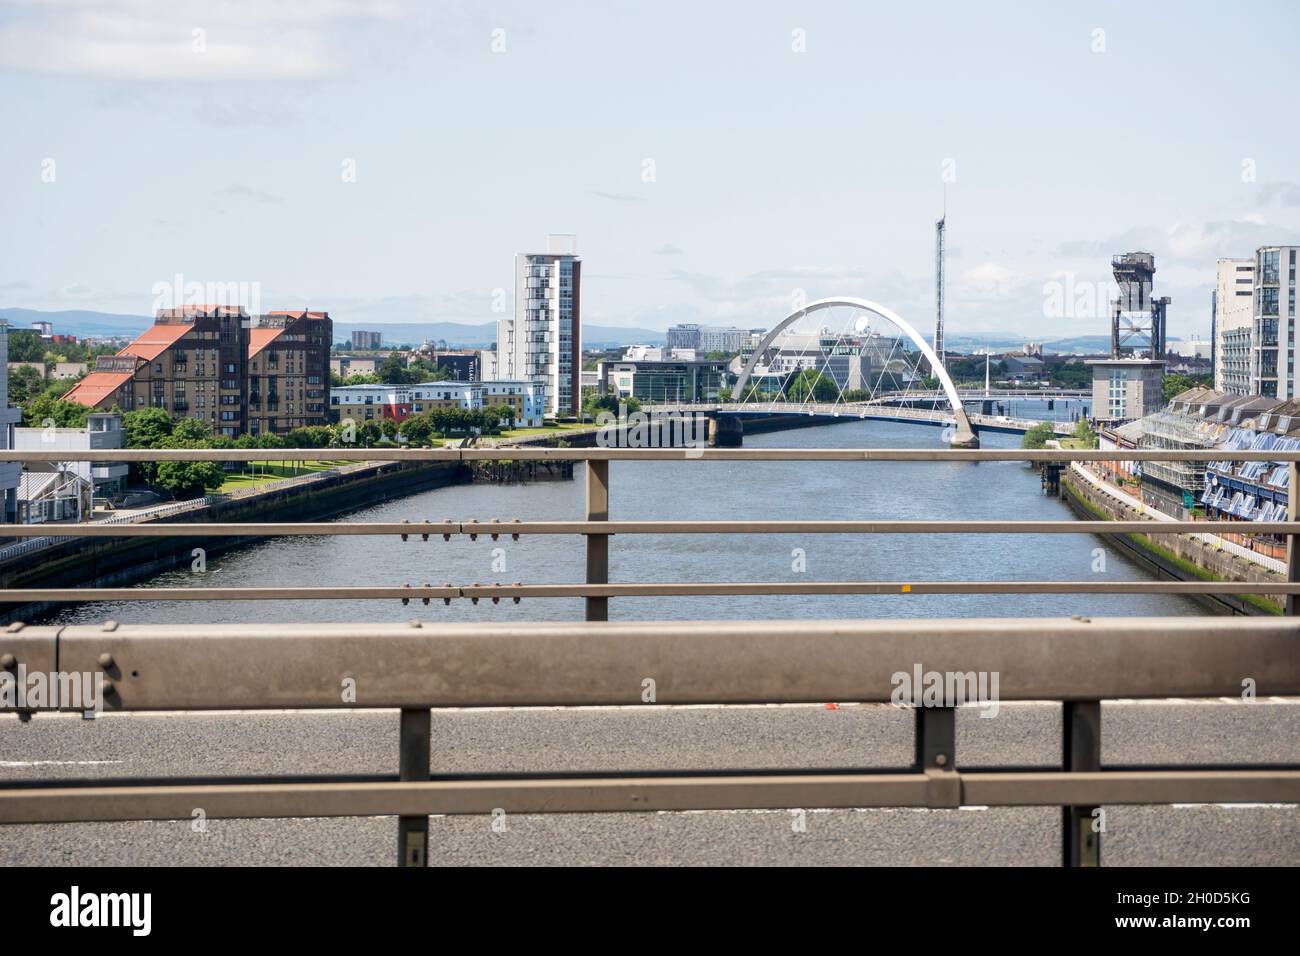 Crossing River Clyde on M8 motorway in Glasgow via Kingston Bridge.  Travelling north with view to the west showing the Clyde Arc or Squinty Bridge. Stock Photo